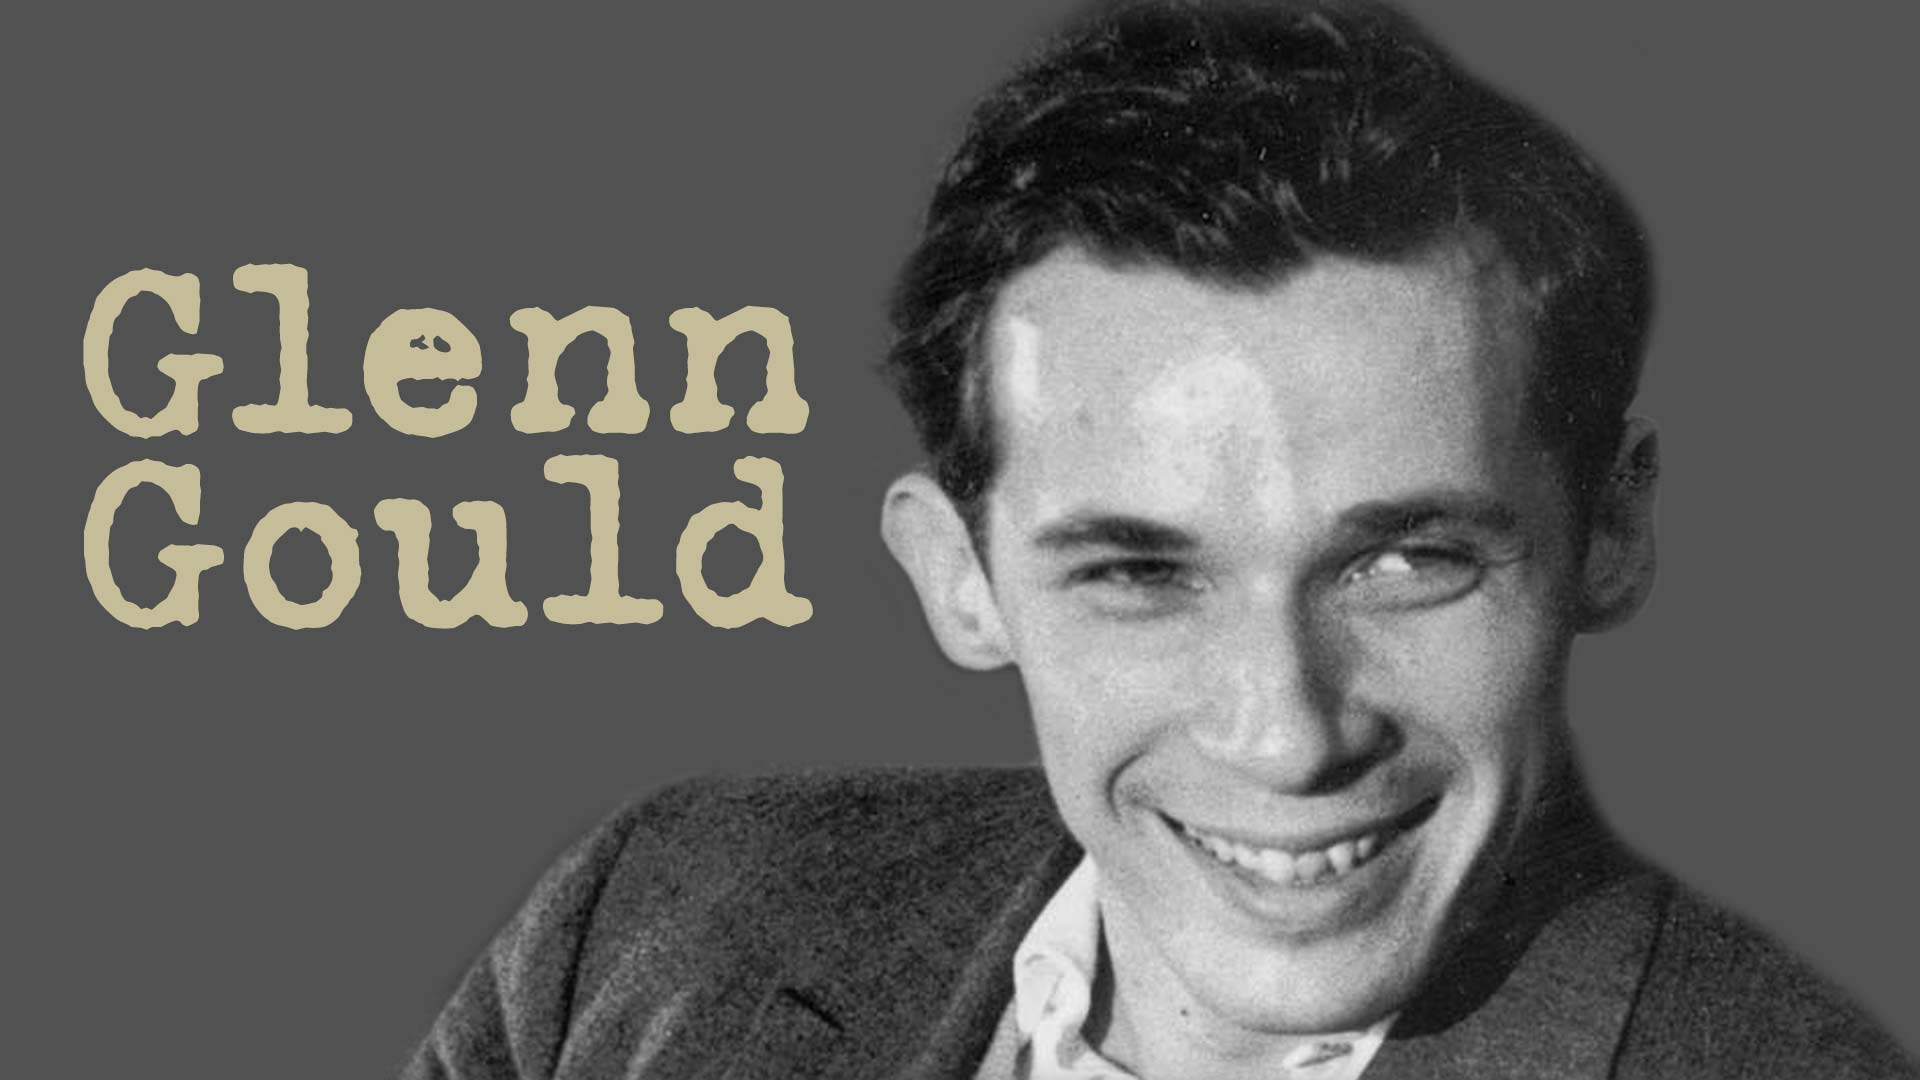 Glenn Gould: On & Off the Record (two films) - OVID.tv